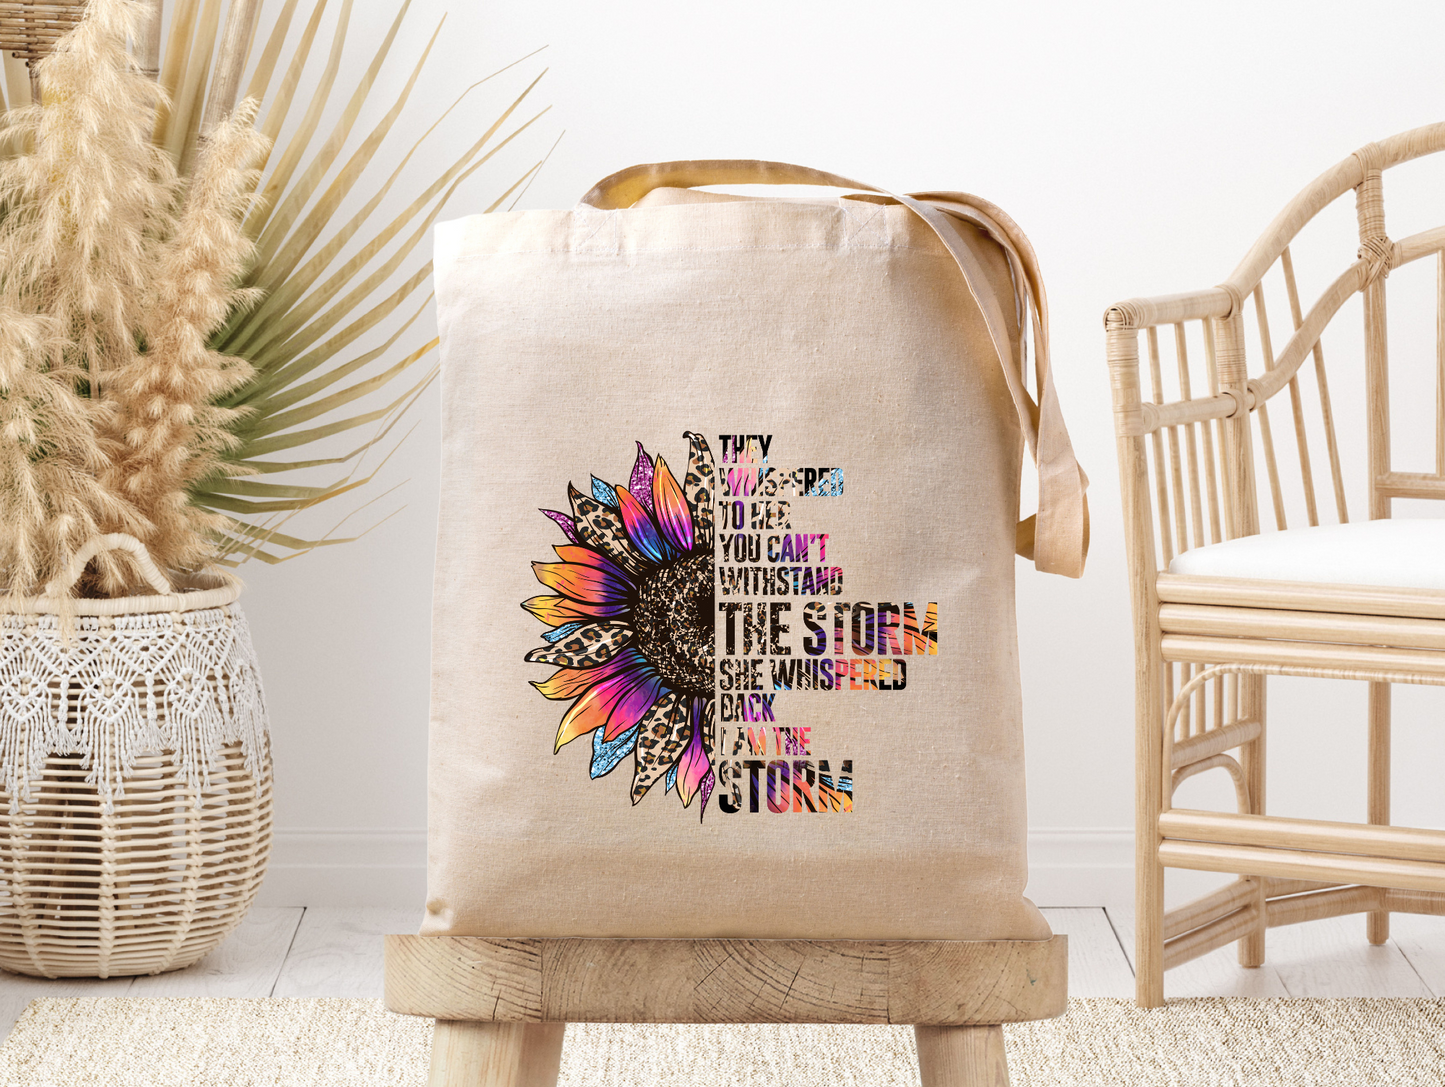 She is the Storm - Canvas Tote Bag